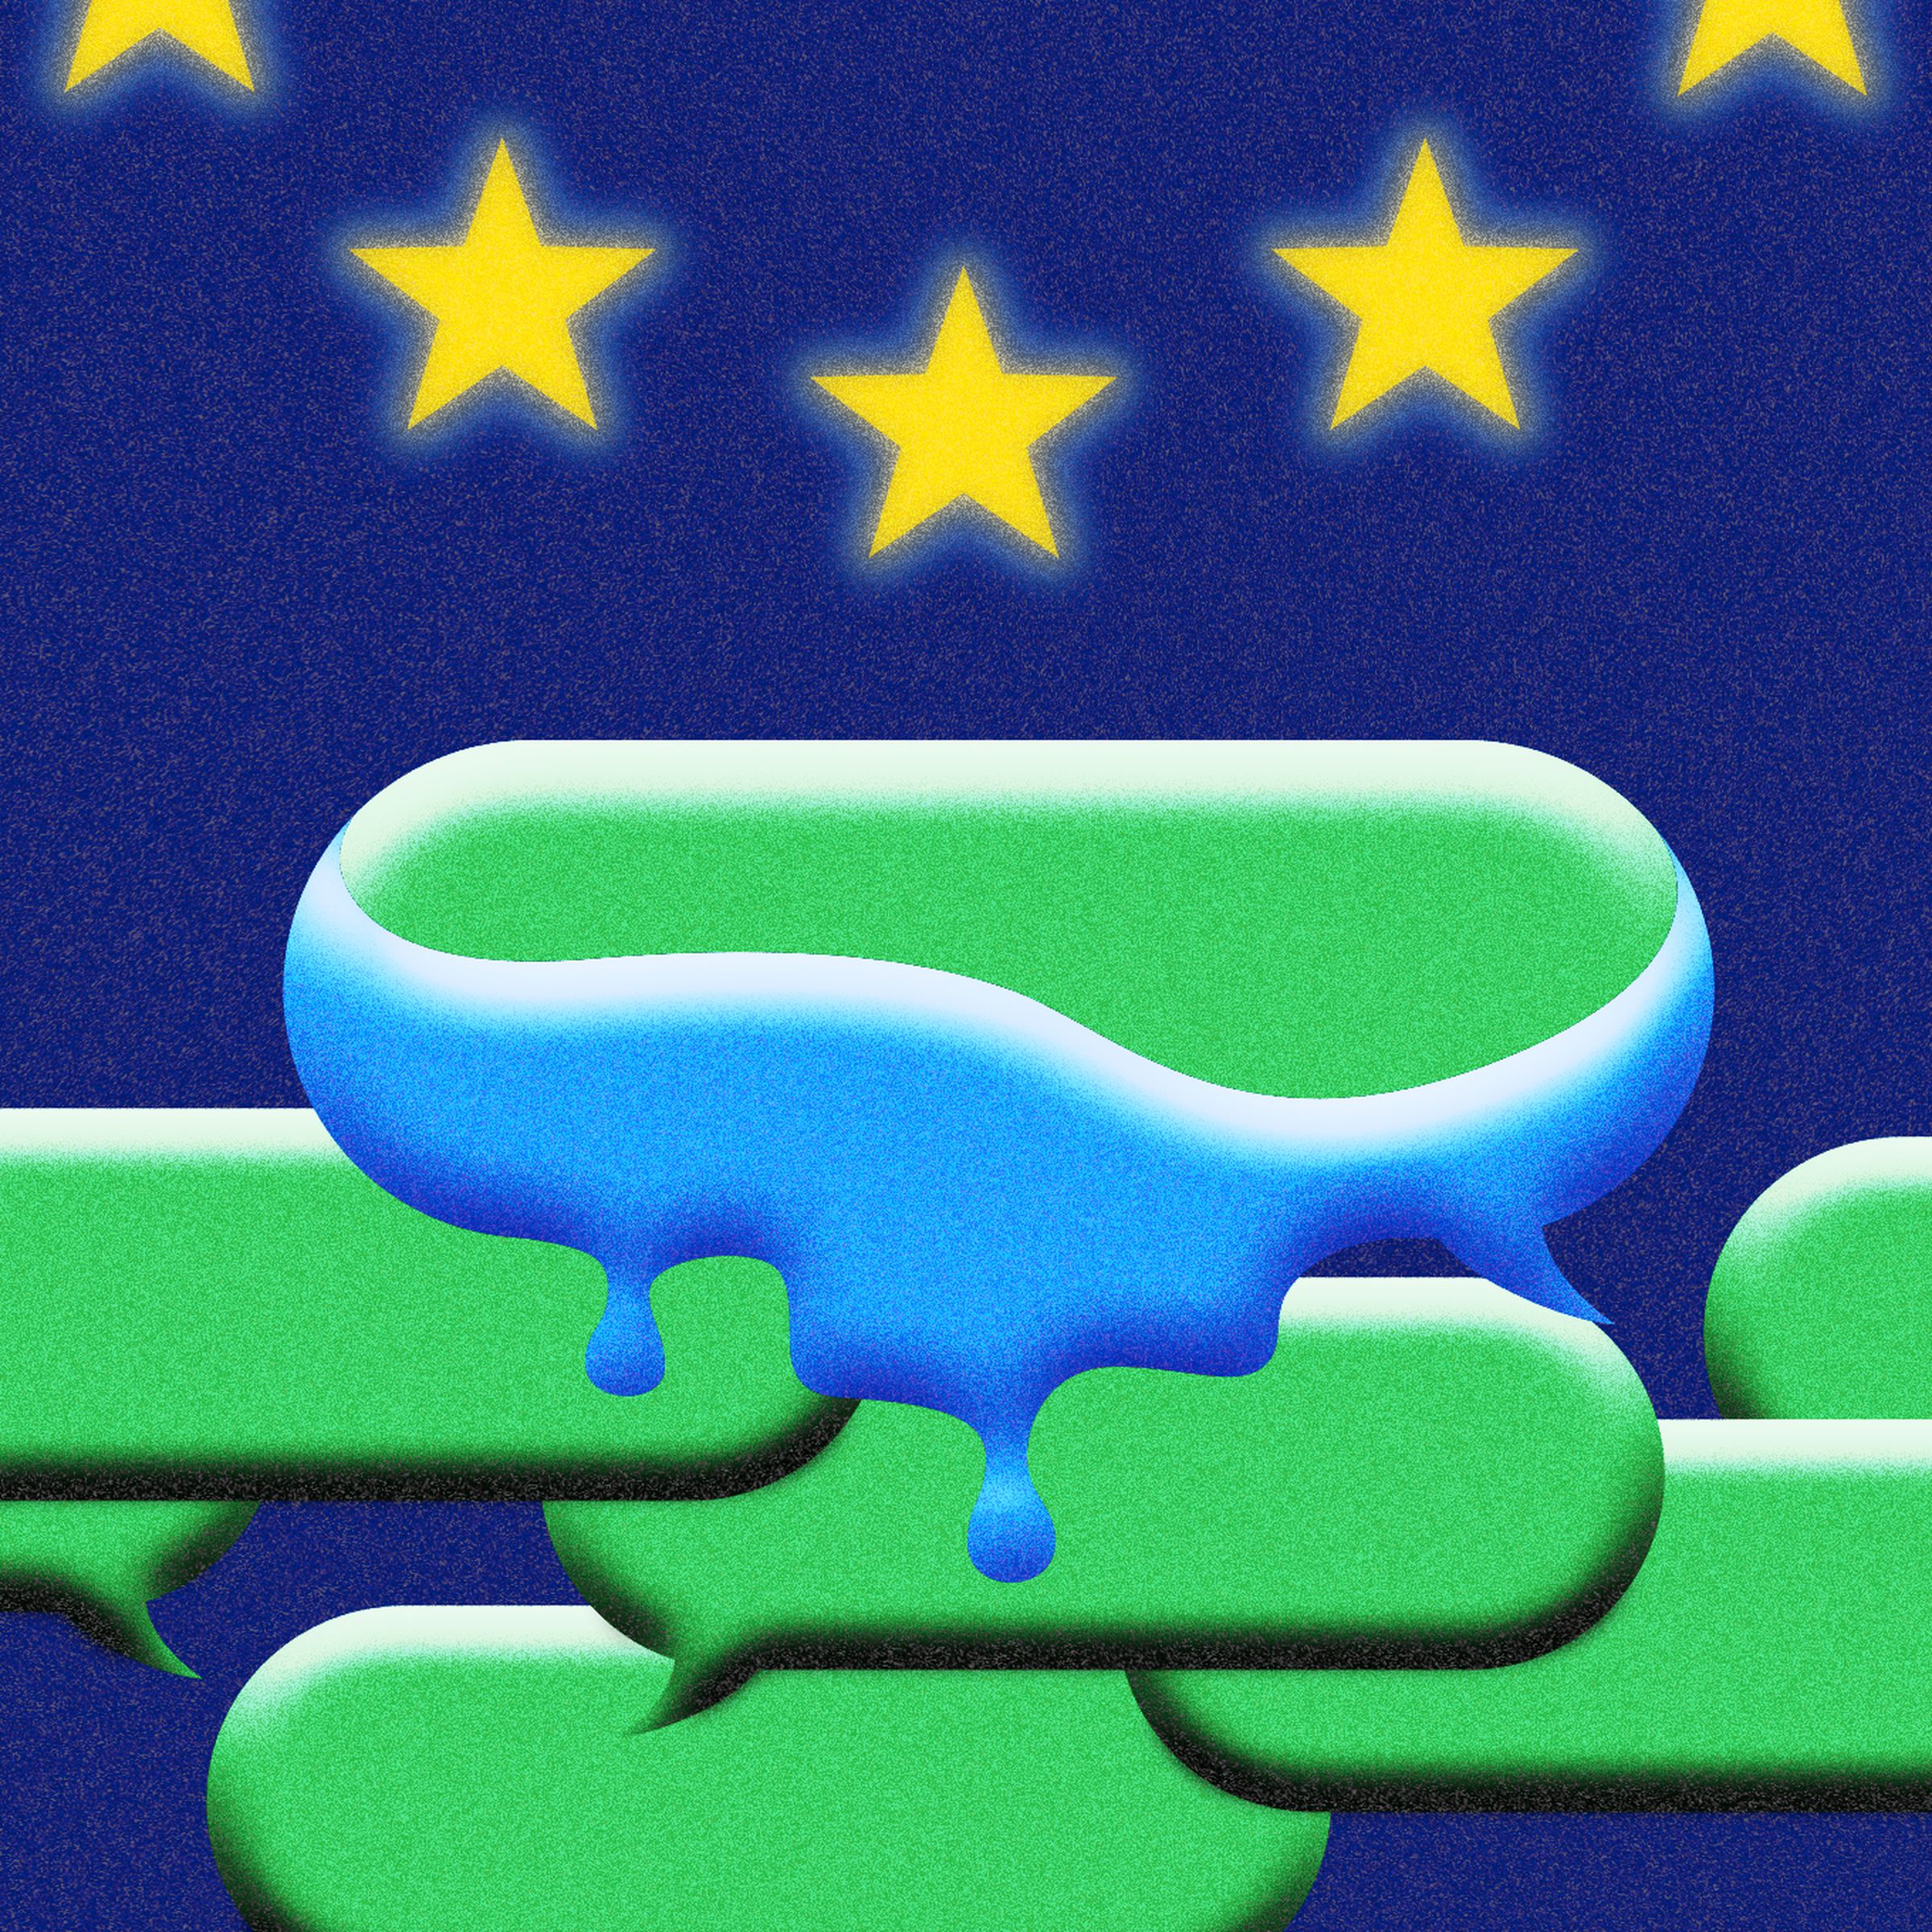 Illustration of the stars of the European Union melting the blue color off of an iMessage bubble, to show the pressure on Apple to open up iMessage.